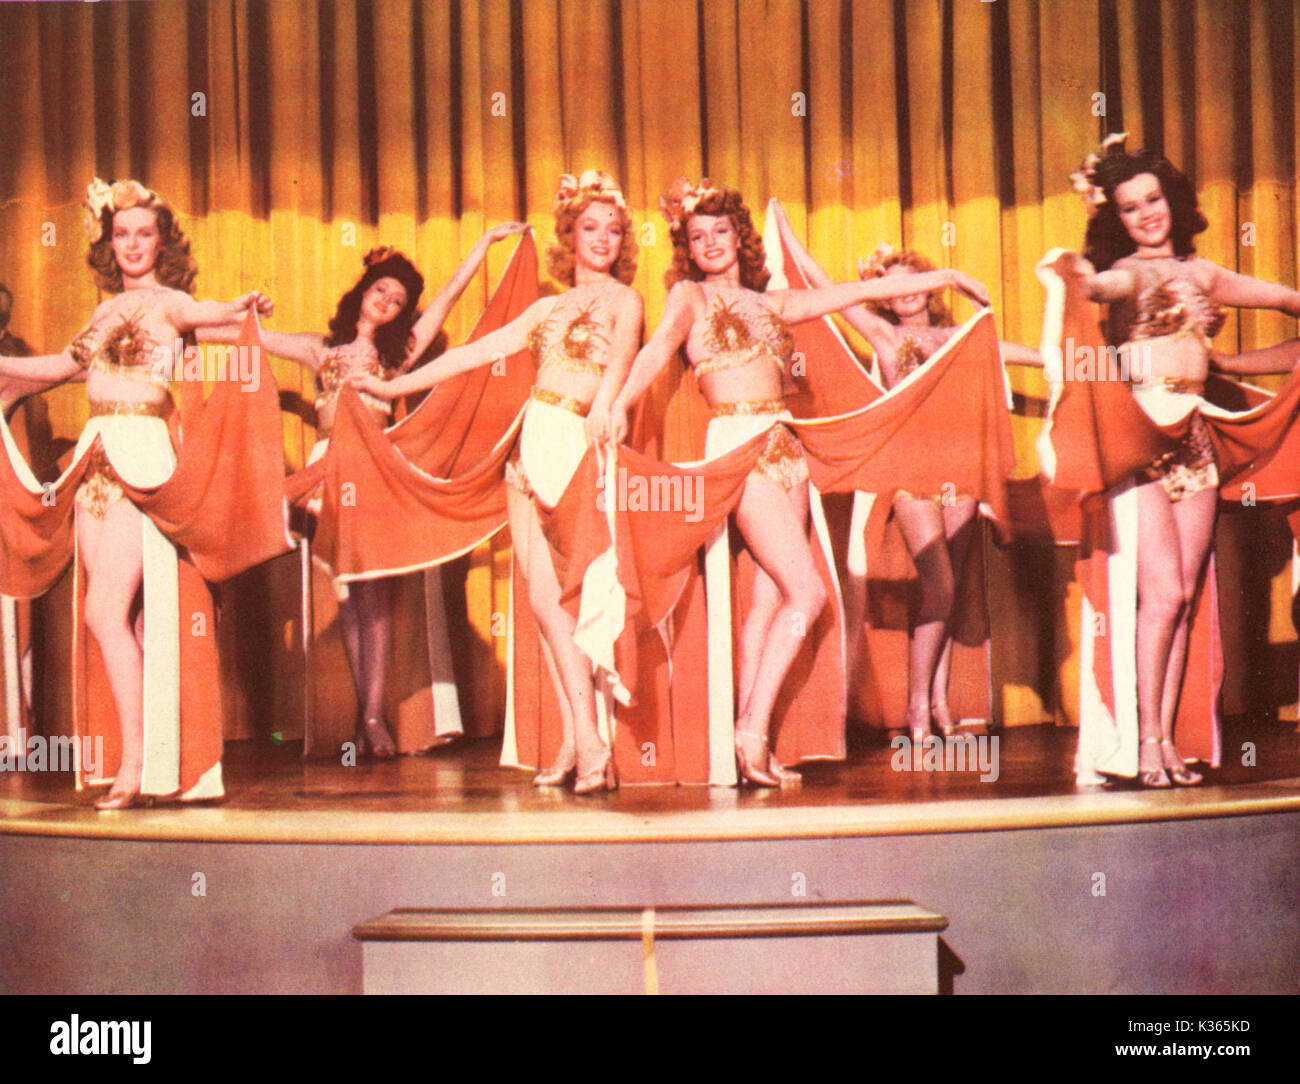 COVER GIRL DIRECTED BY CHARLES VIDOR IN TECHNICOLOR RITA HAYWORTH (3RD FROM LEFT)   COVER GIRL (US 1944) RITA HAYWORTH Stock Photo